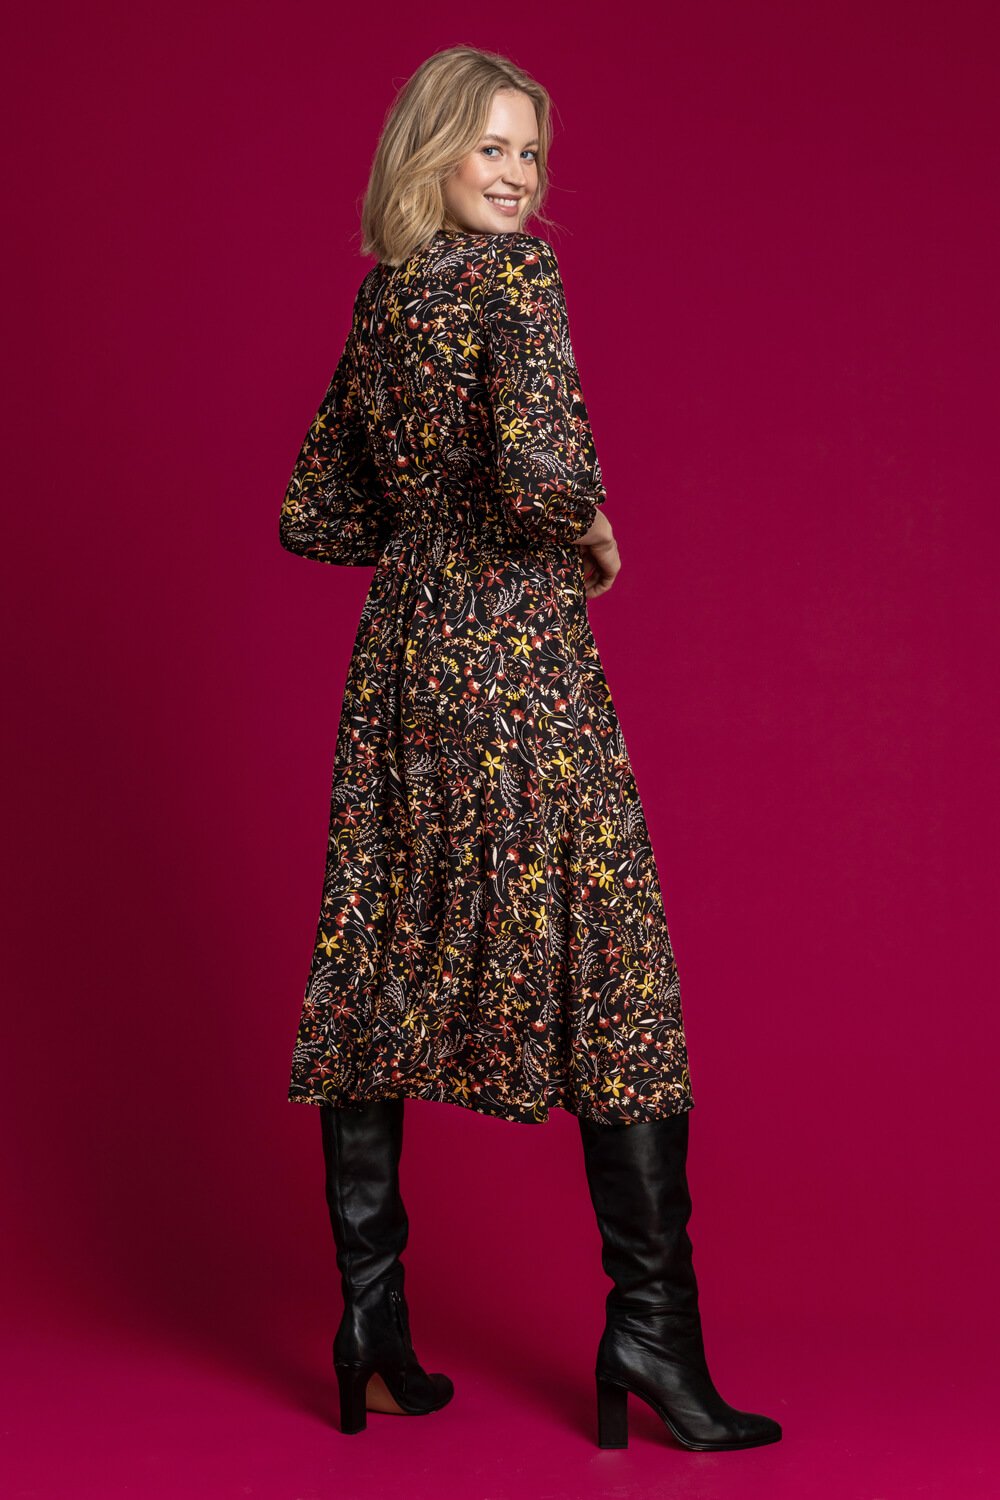 Copper Floral Print Tie Front Dress, Image 2 of 5